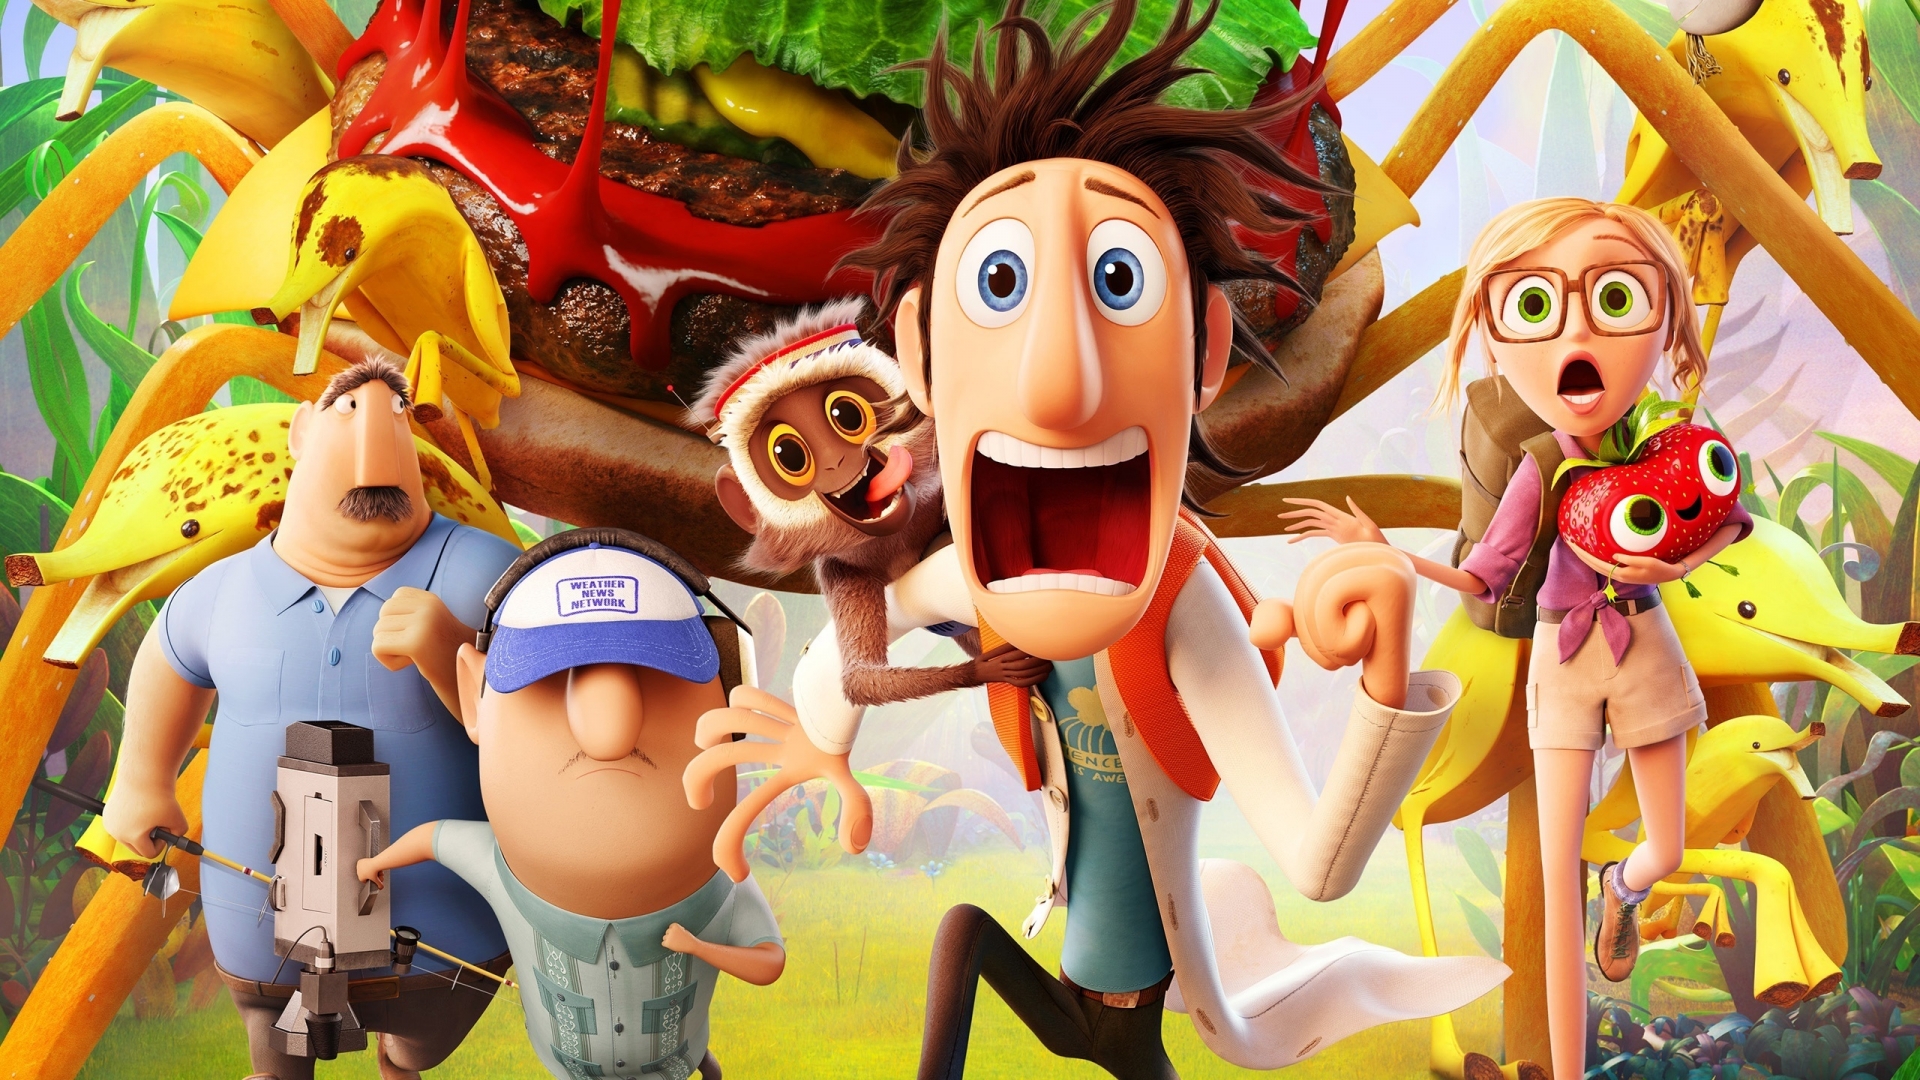 Cloudy with a Chance of Meatballs 2 Cast for 1920 x 1080 HDTV 1080p resolution